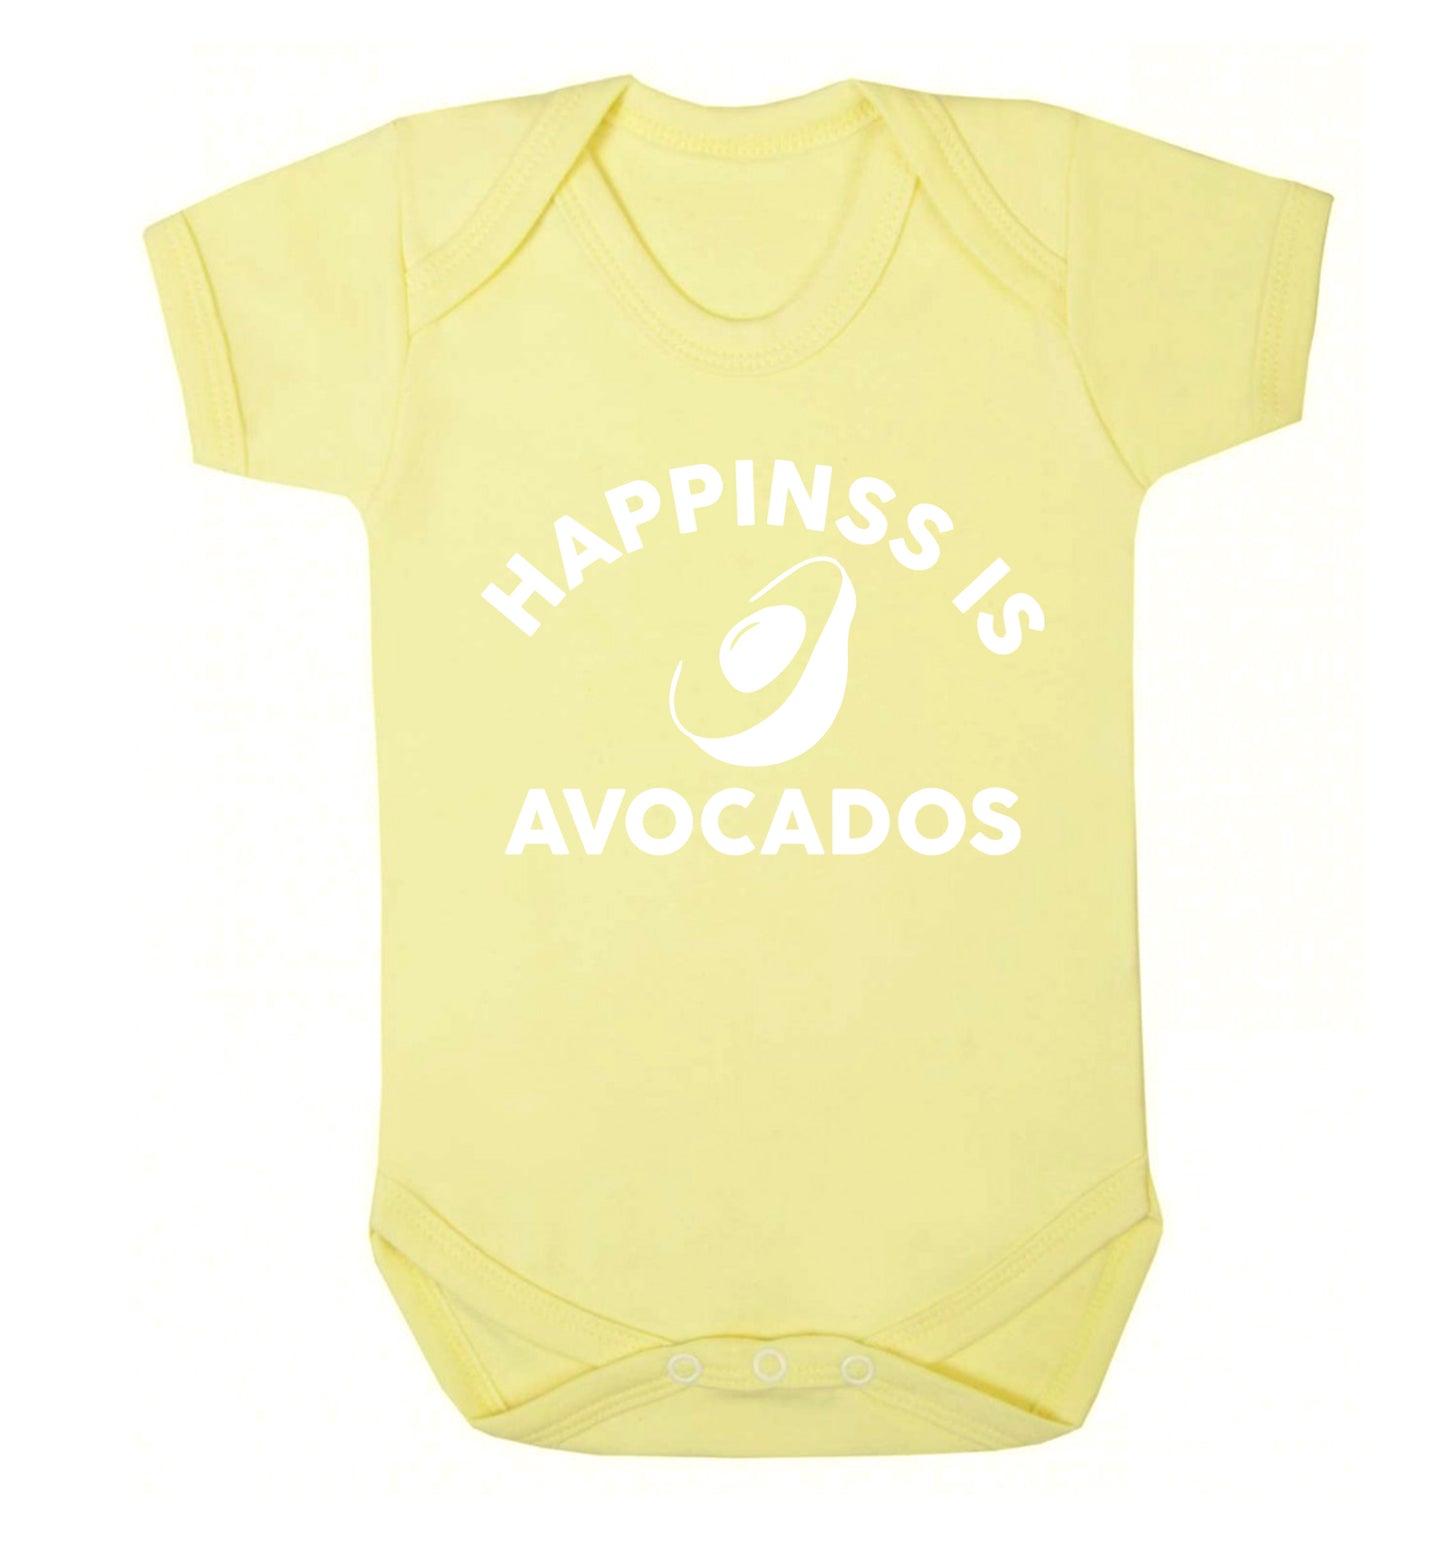 Happiness is avocados Baby Vest pale yellow 18-24 months